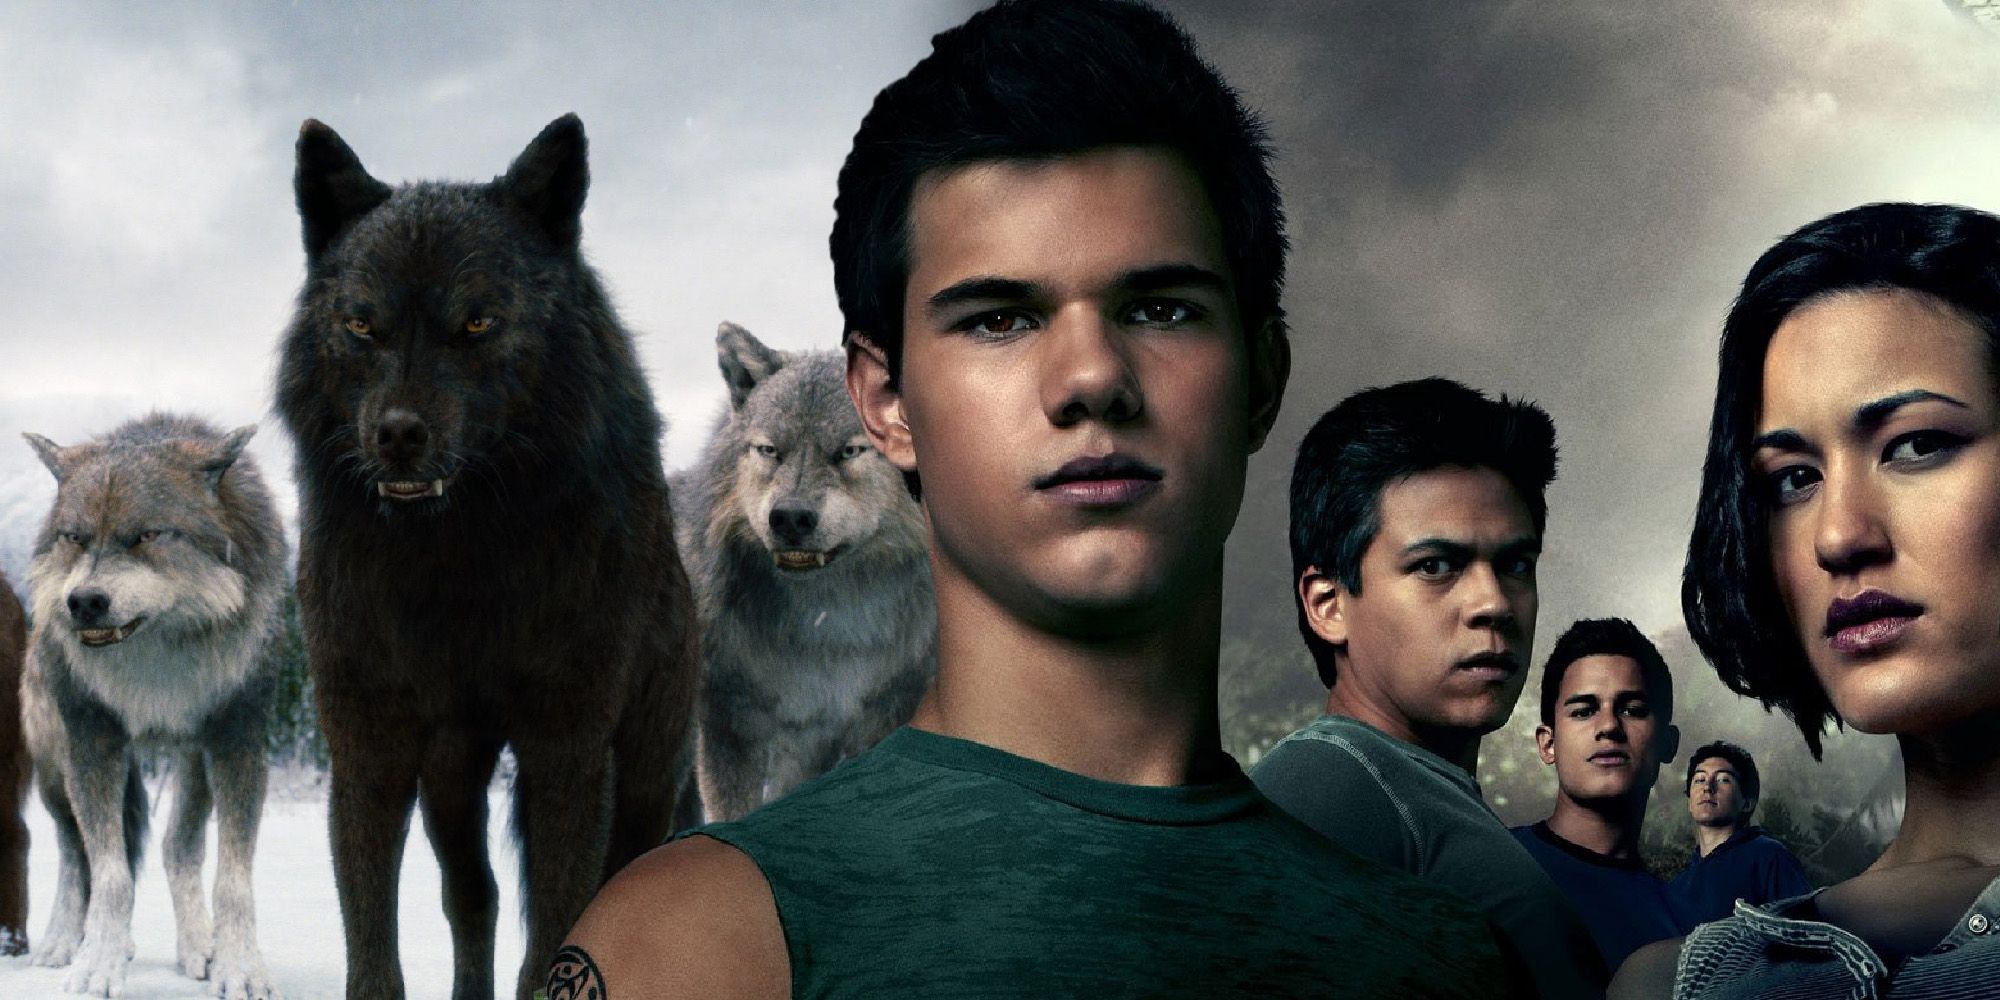 Werwolf and wolf pack image from Twilight Eclipse and Breaking Dawn.